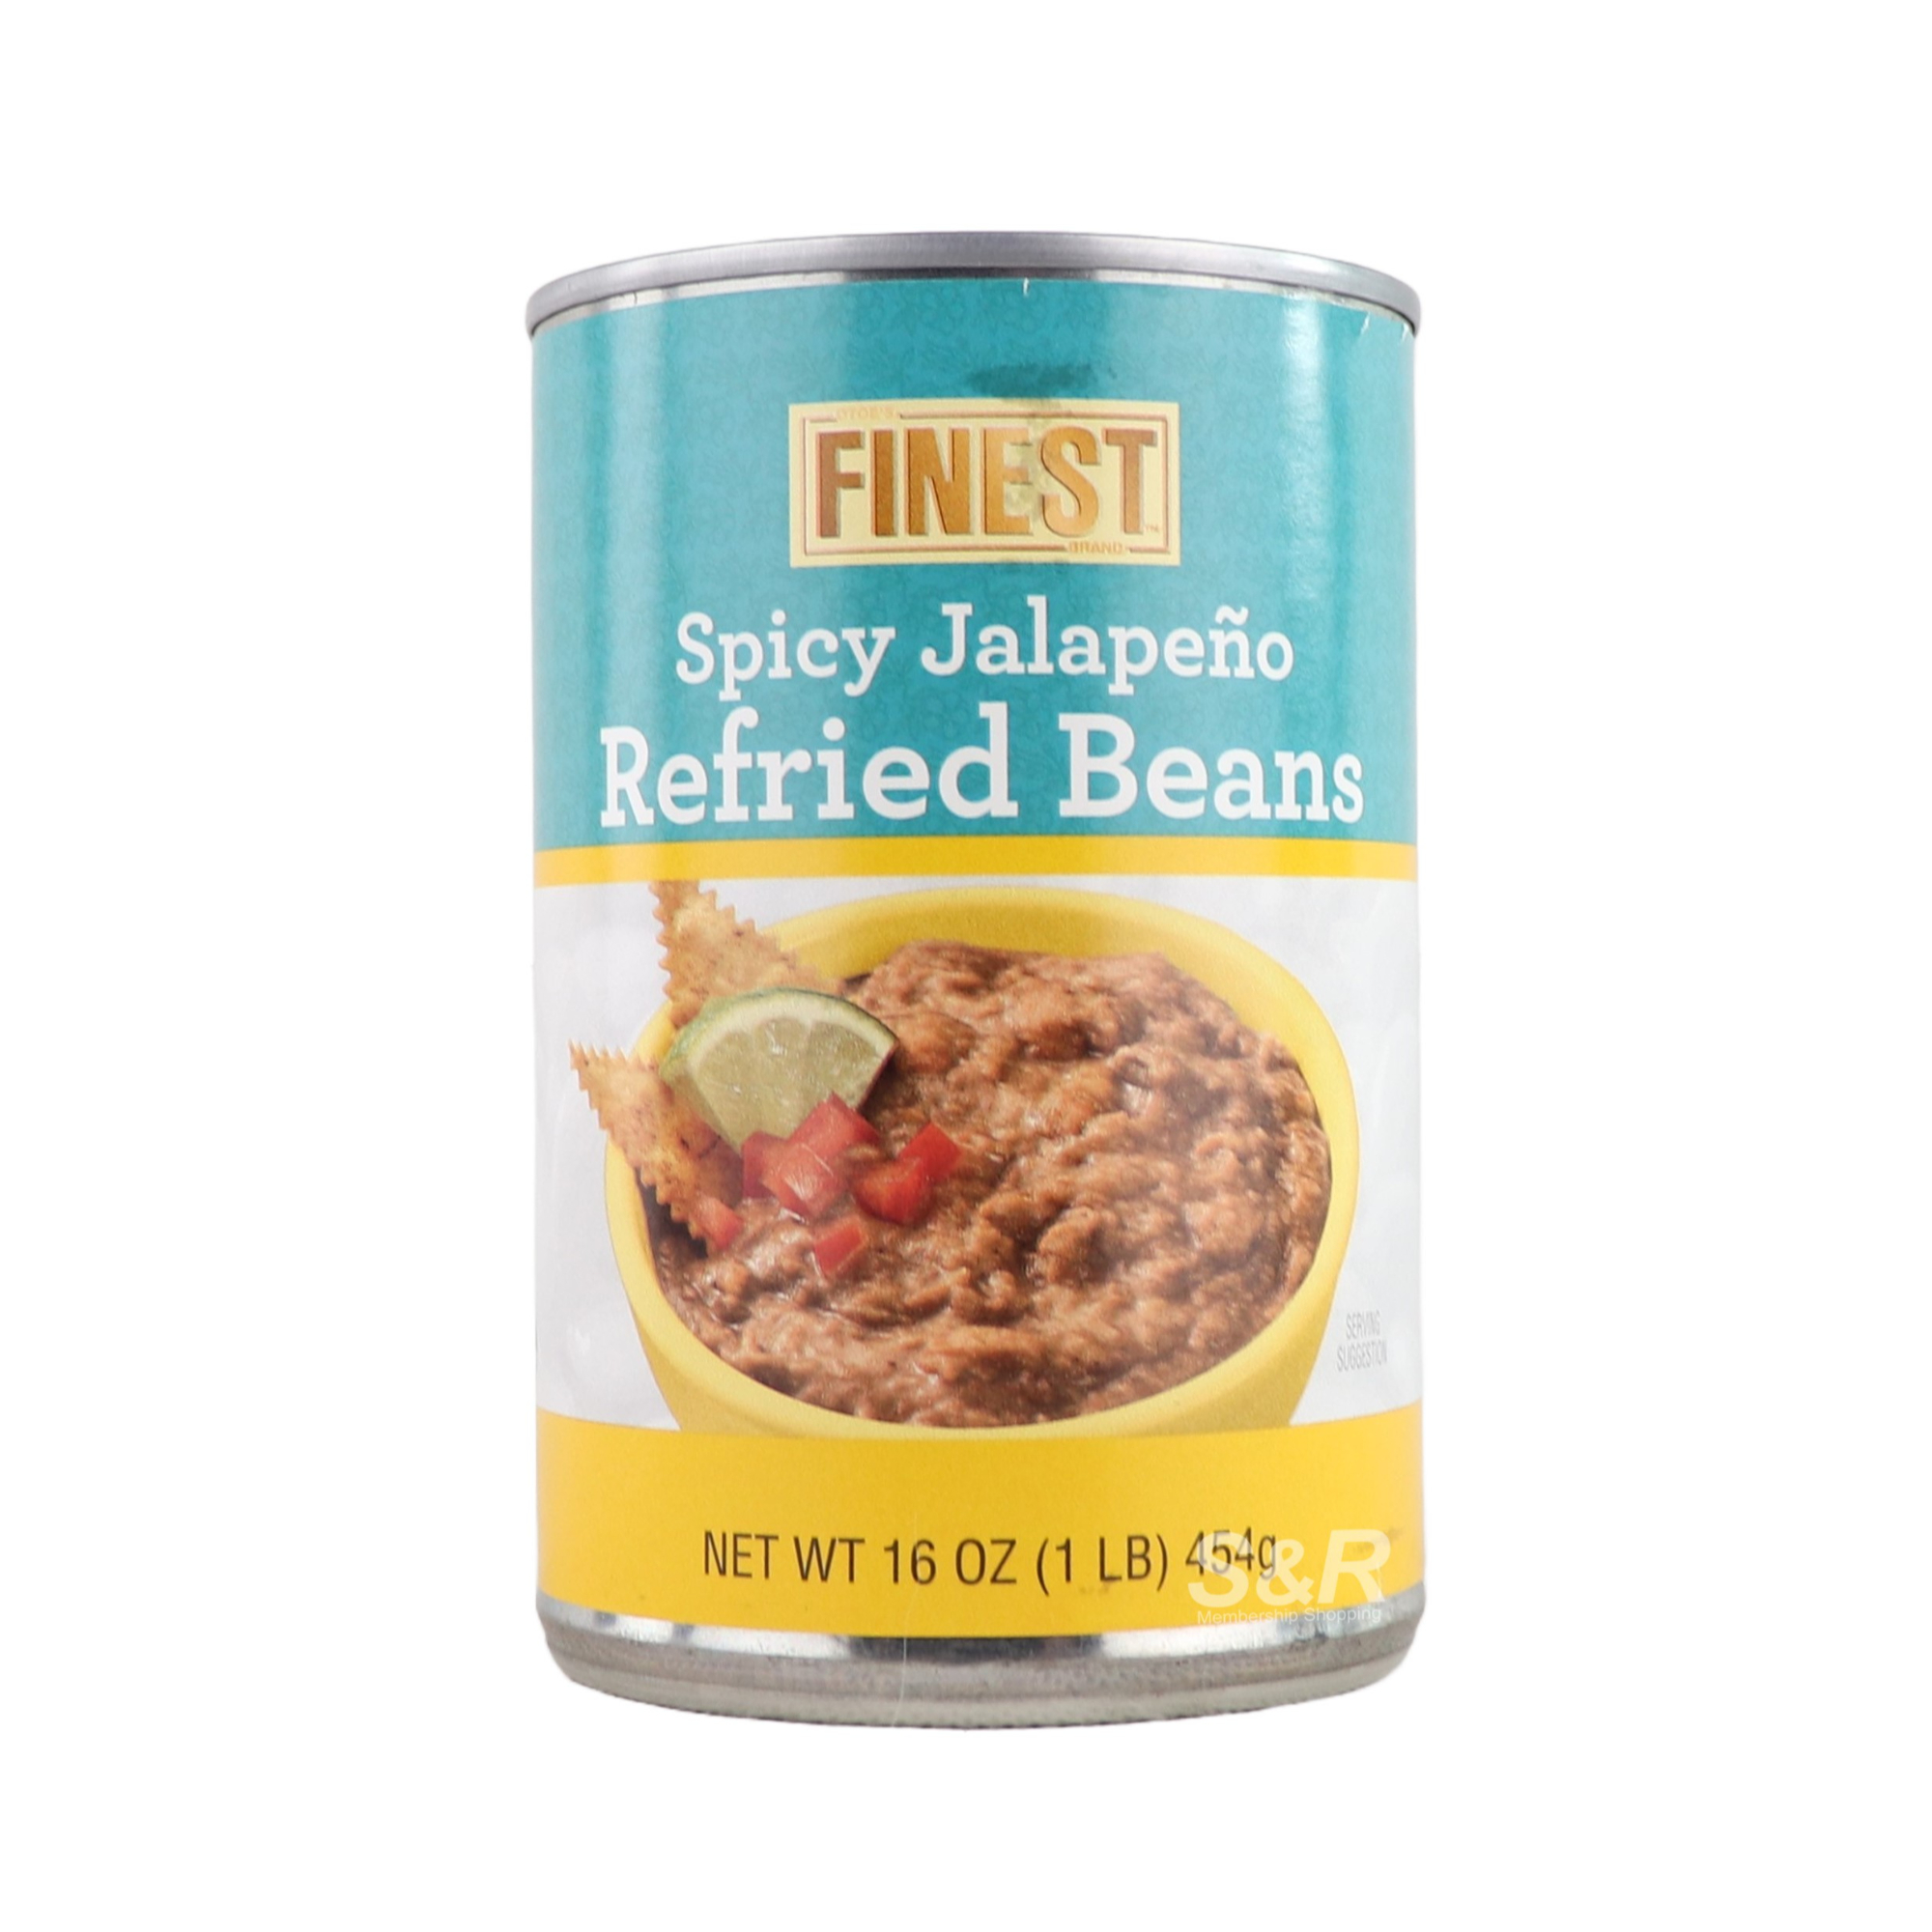 Finest Spicy Jalapeno Refried Beans 454g